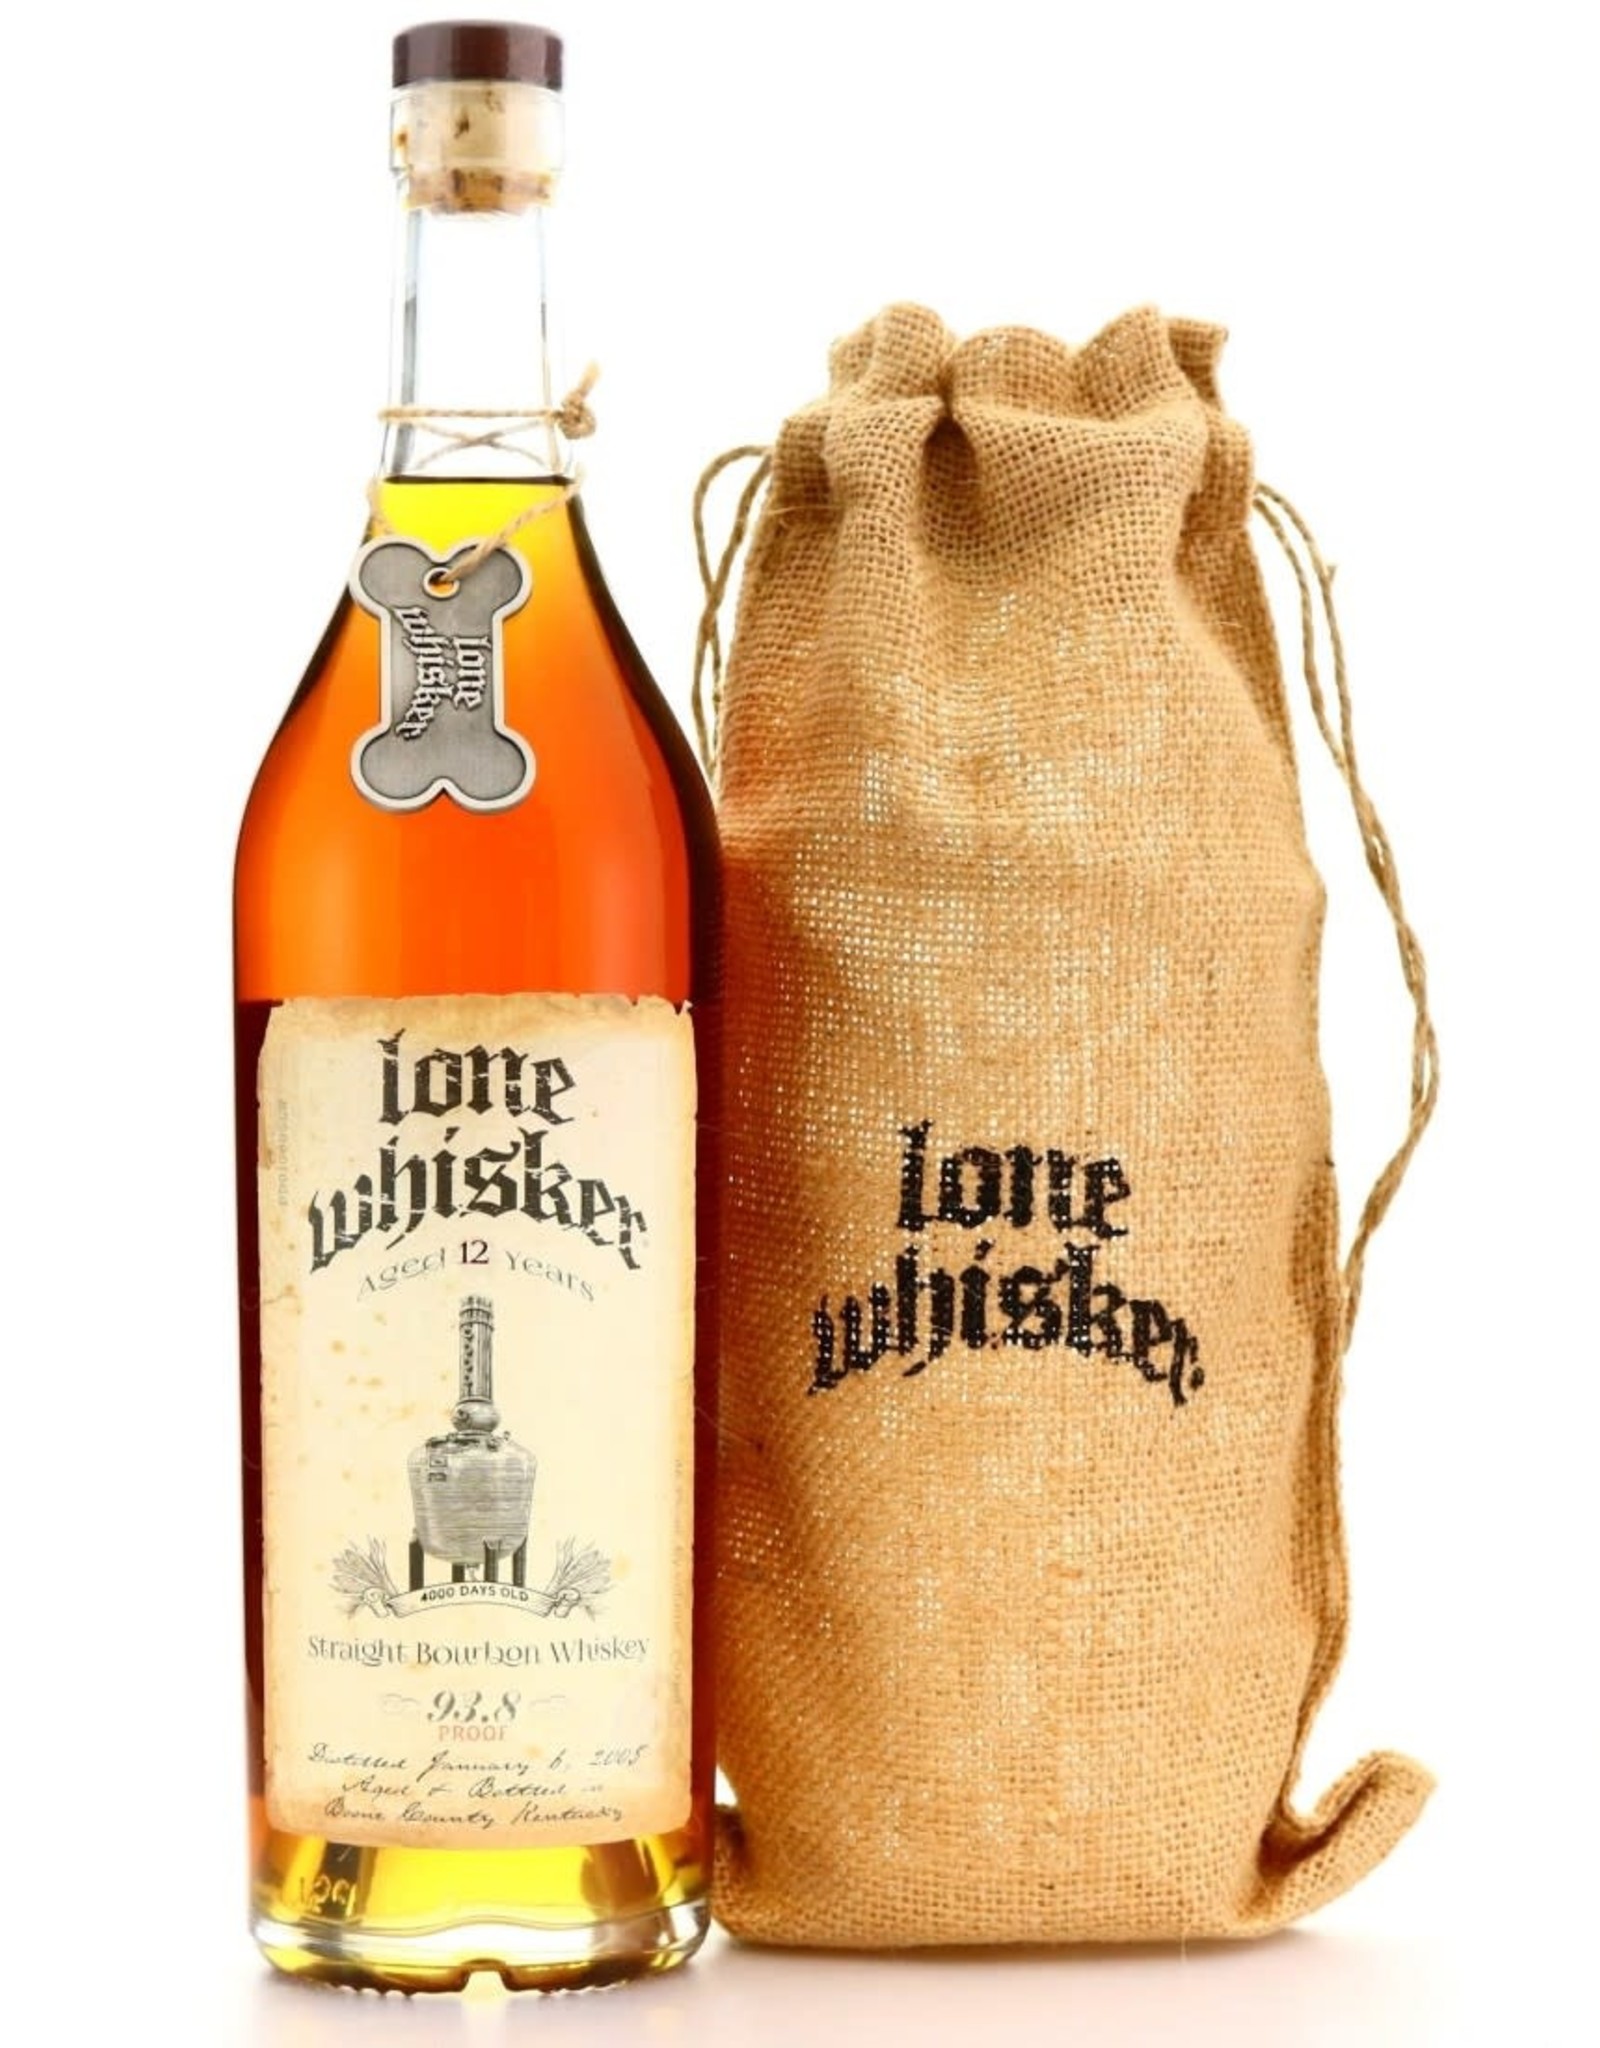 Lone Whiskey Lone Whiskey Aged 12 Years 93.8 Proof 750 ml